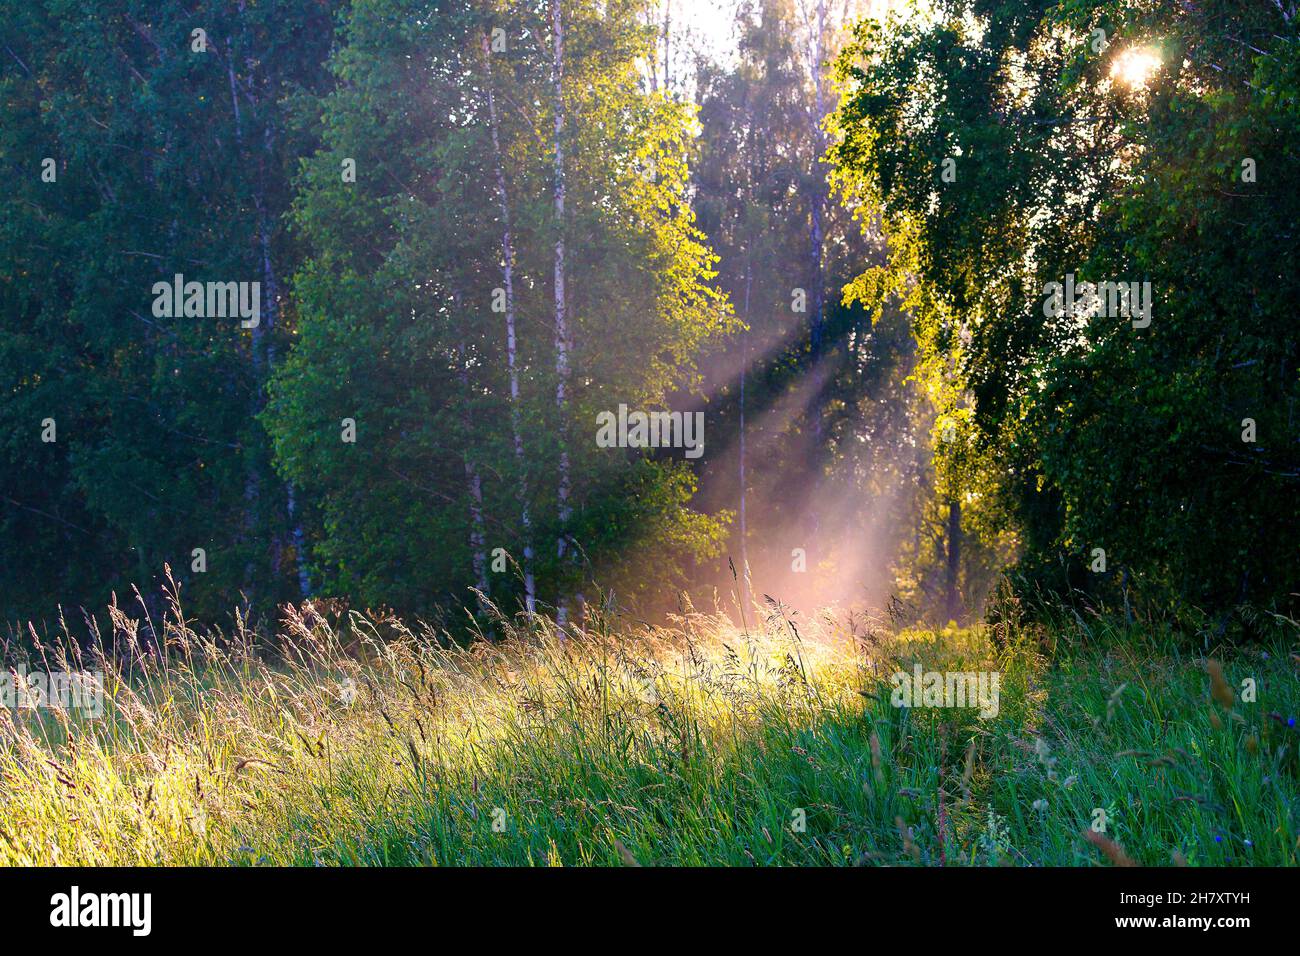 Sun rays entering between the branches of the trees illuminating the green grass Stock Photo